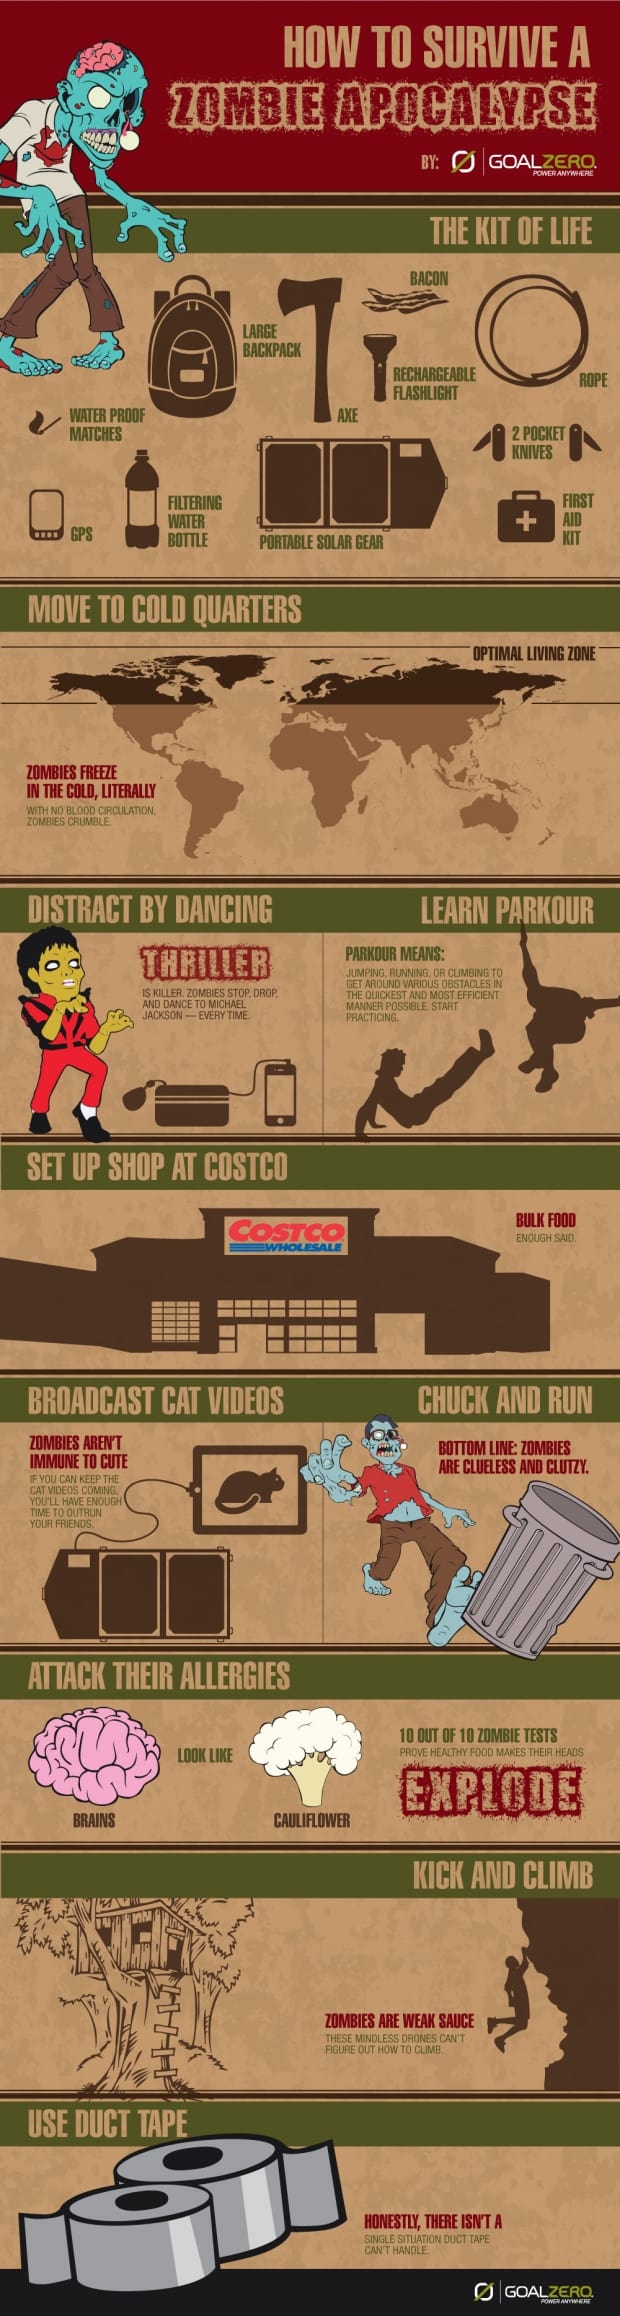 A Humorous Guide To Surviving A Zombie Movie | Daily Infographic